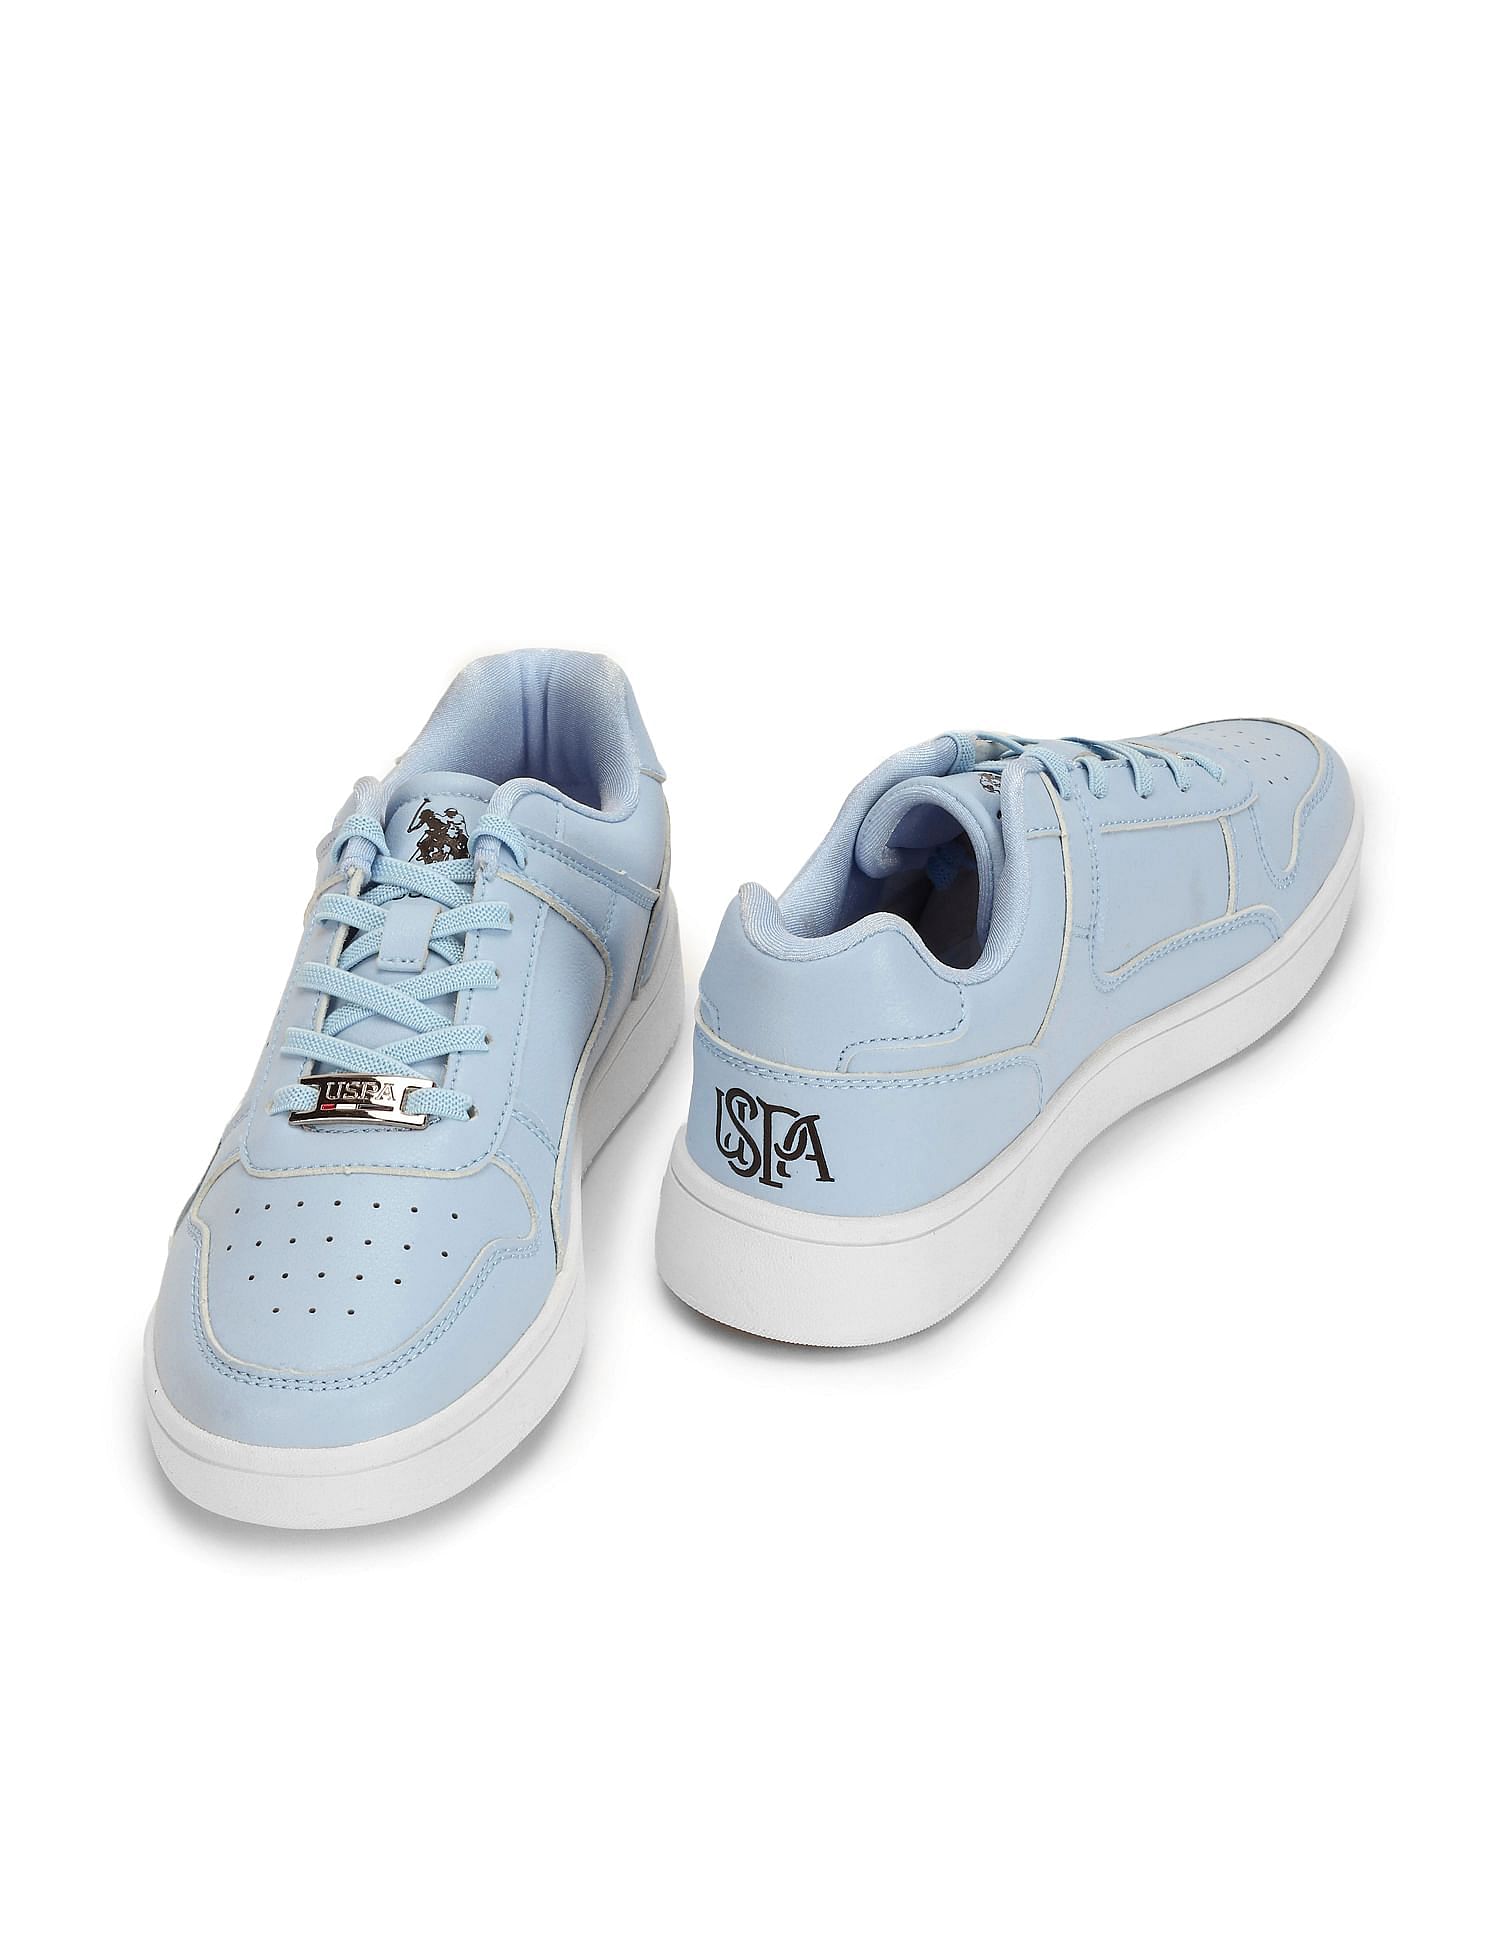 Buy U.S. Polo Assn. Solid Lace Up Dorit Sneakers - NNNOW.com